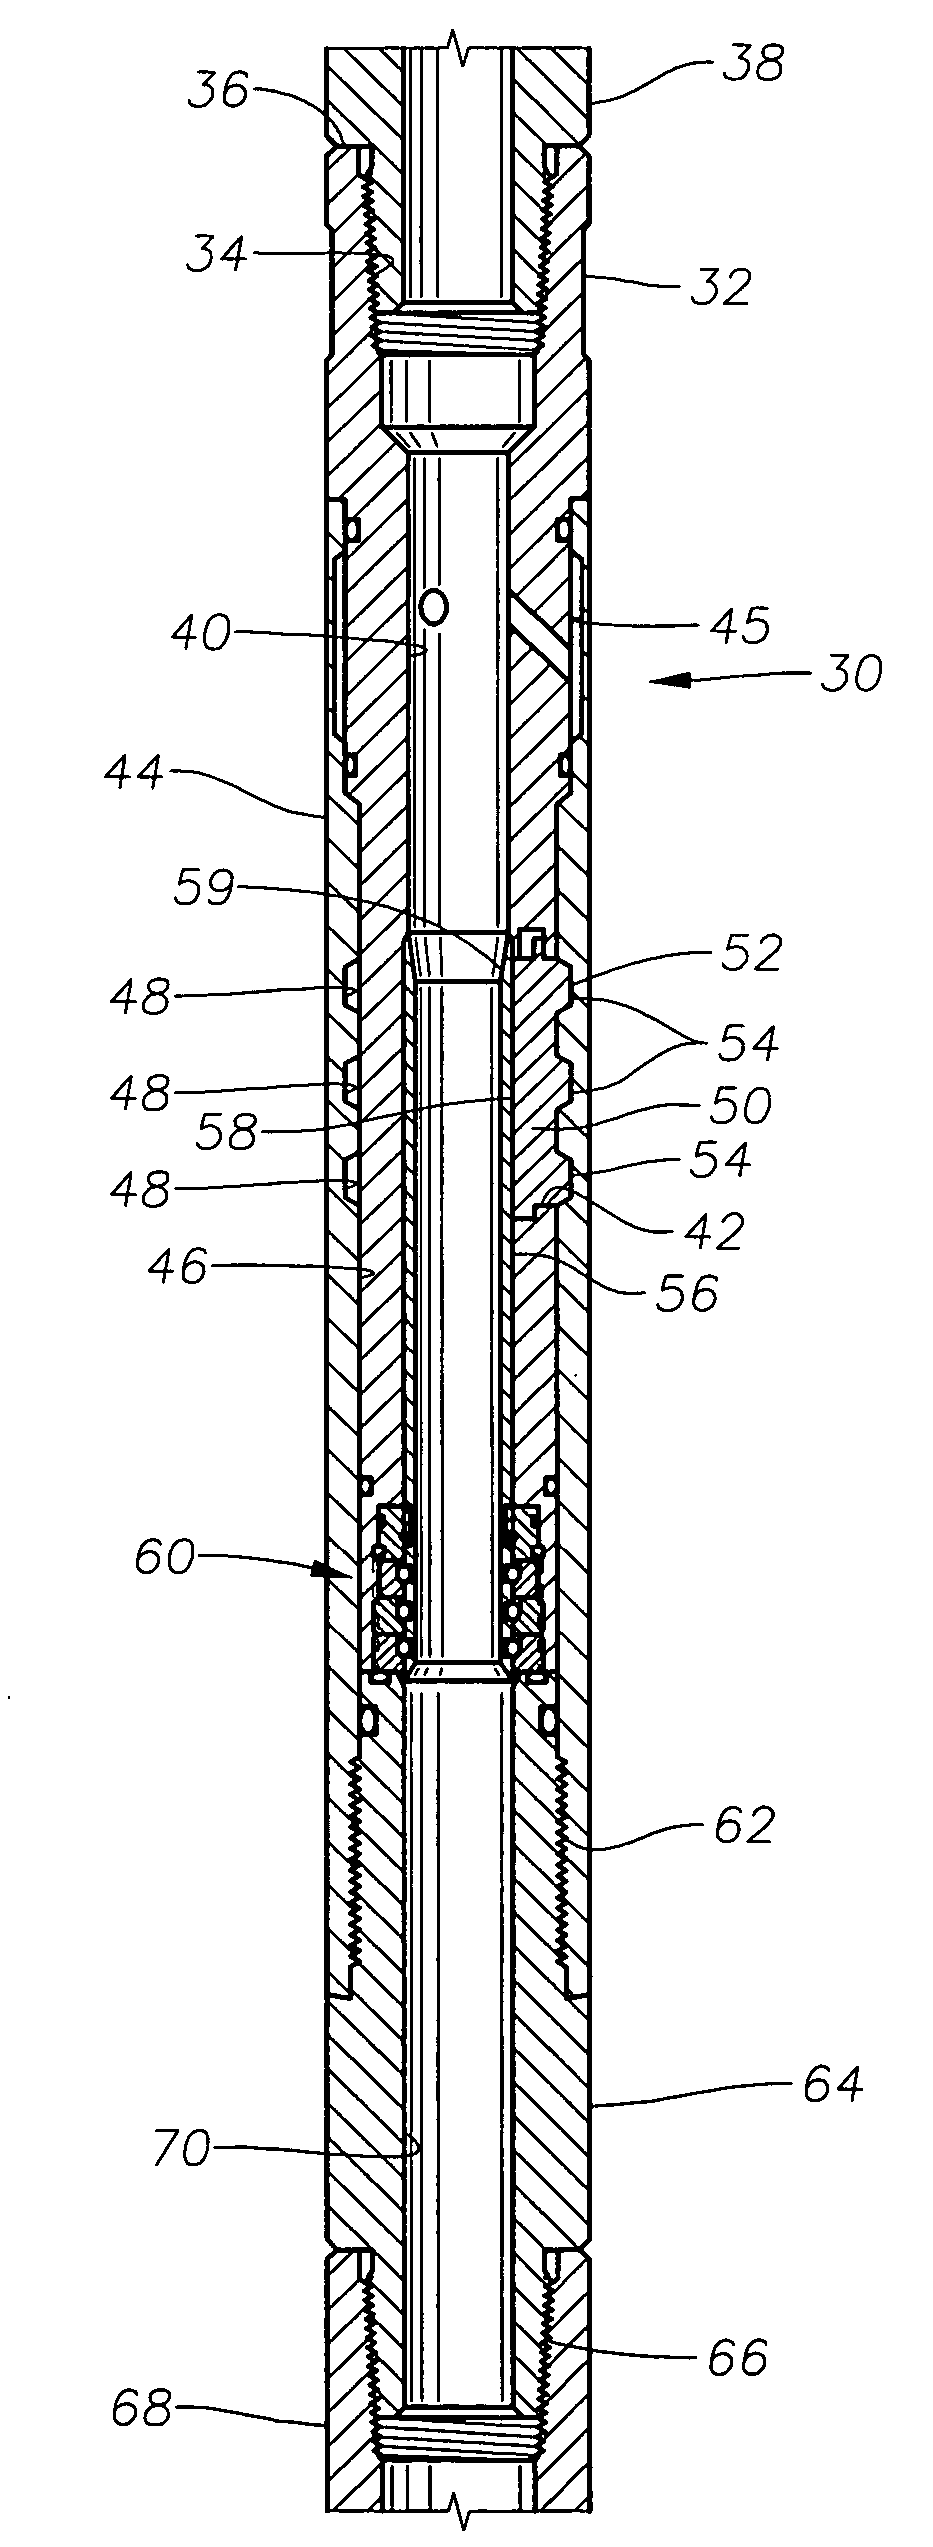 Sliding sleeve devices and methods using O-ring seals as shear members